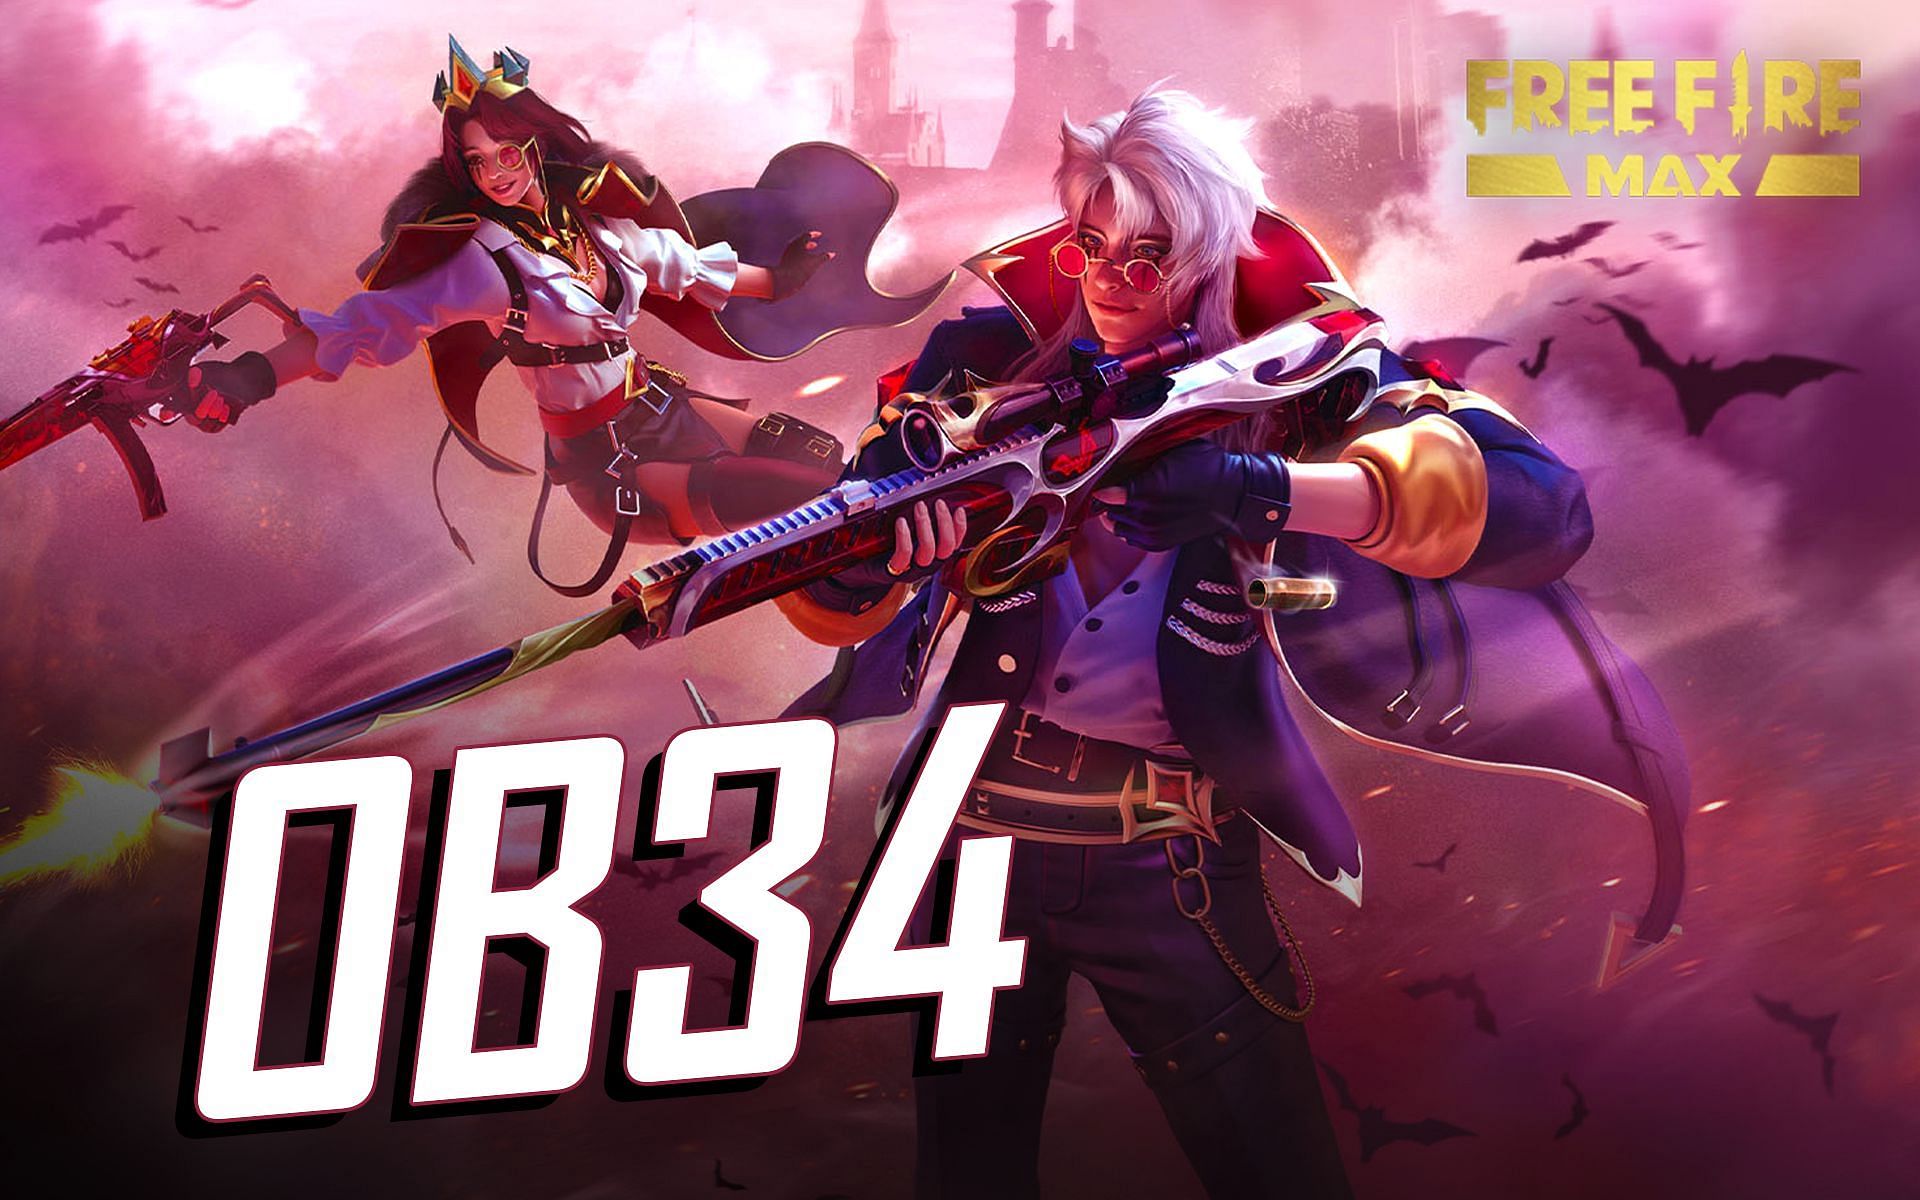 The OB34 release is going to take place soon (Image via Sportskeeda)